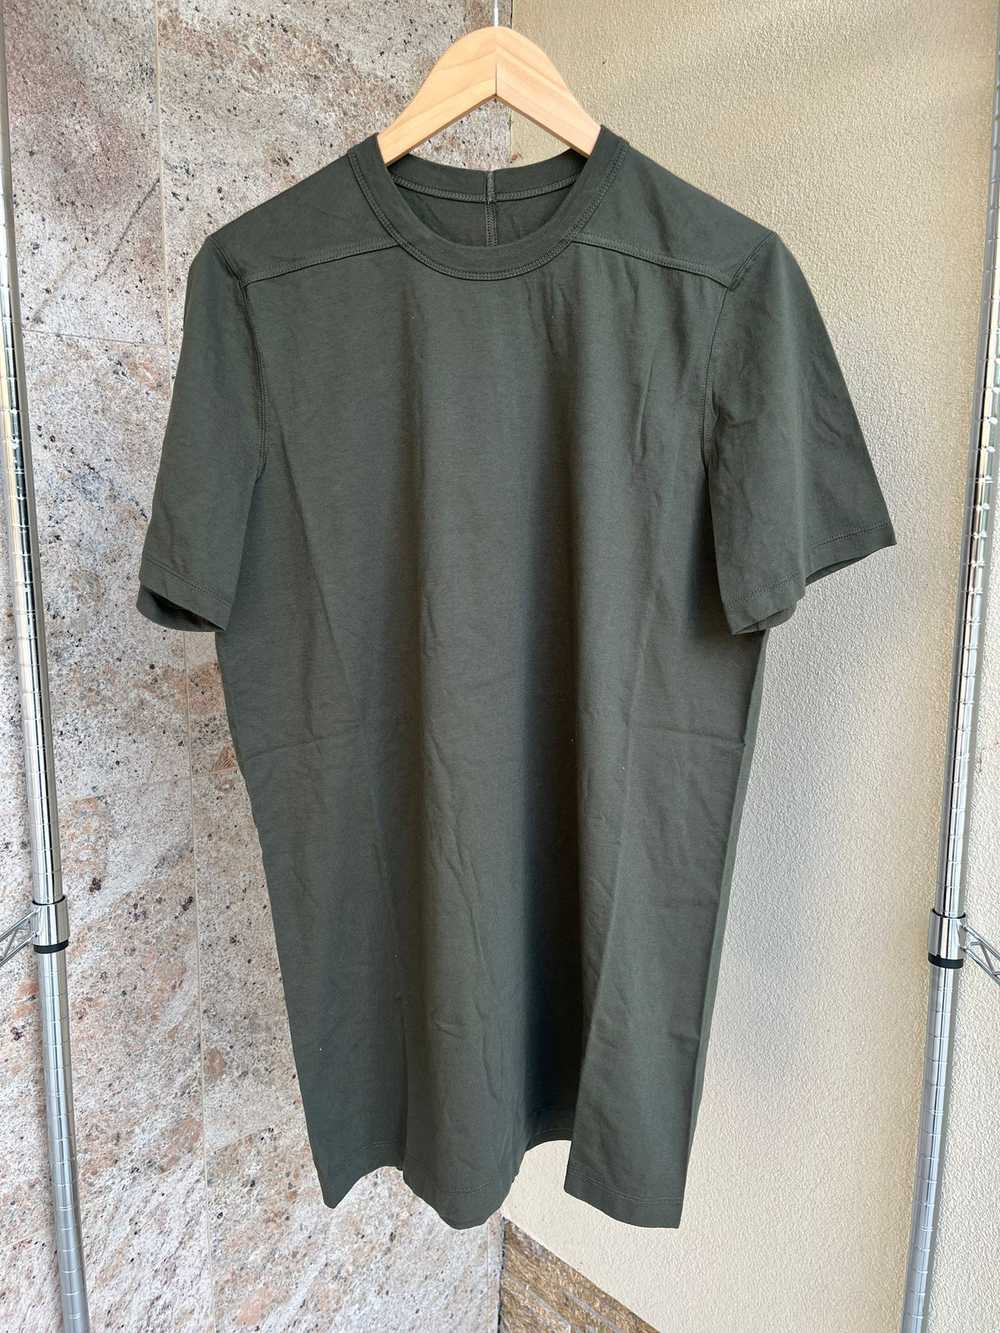 Rick Owens Mainline Level T-Shirt in Green - image 3